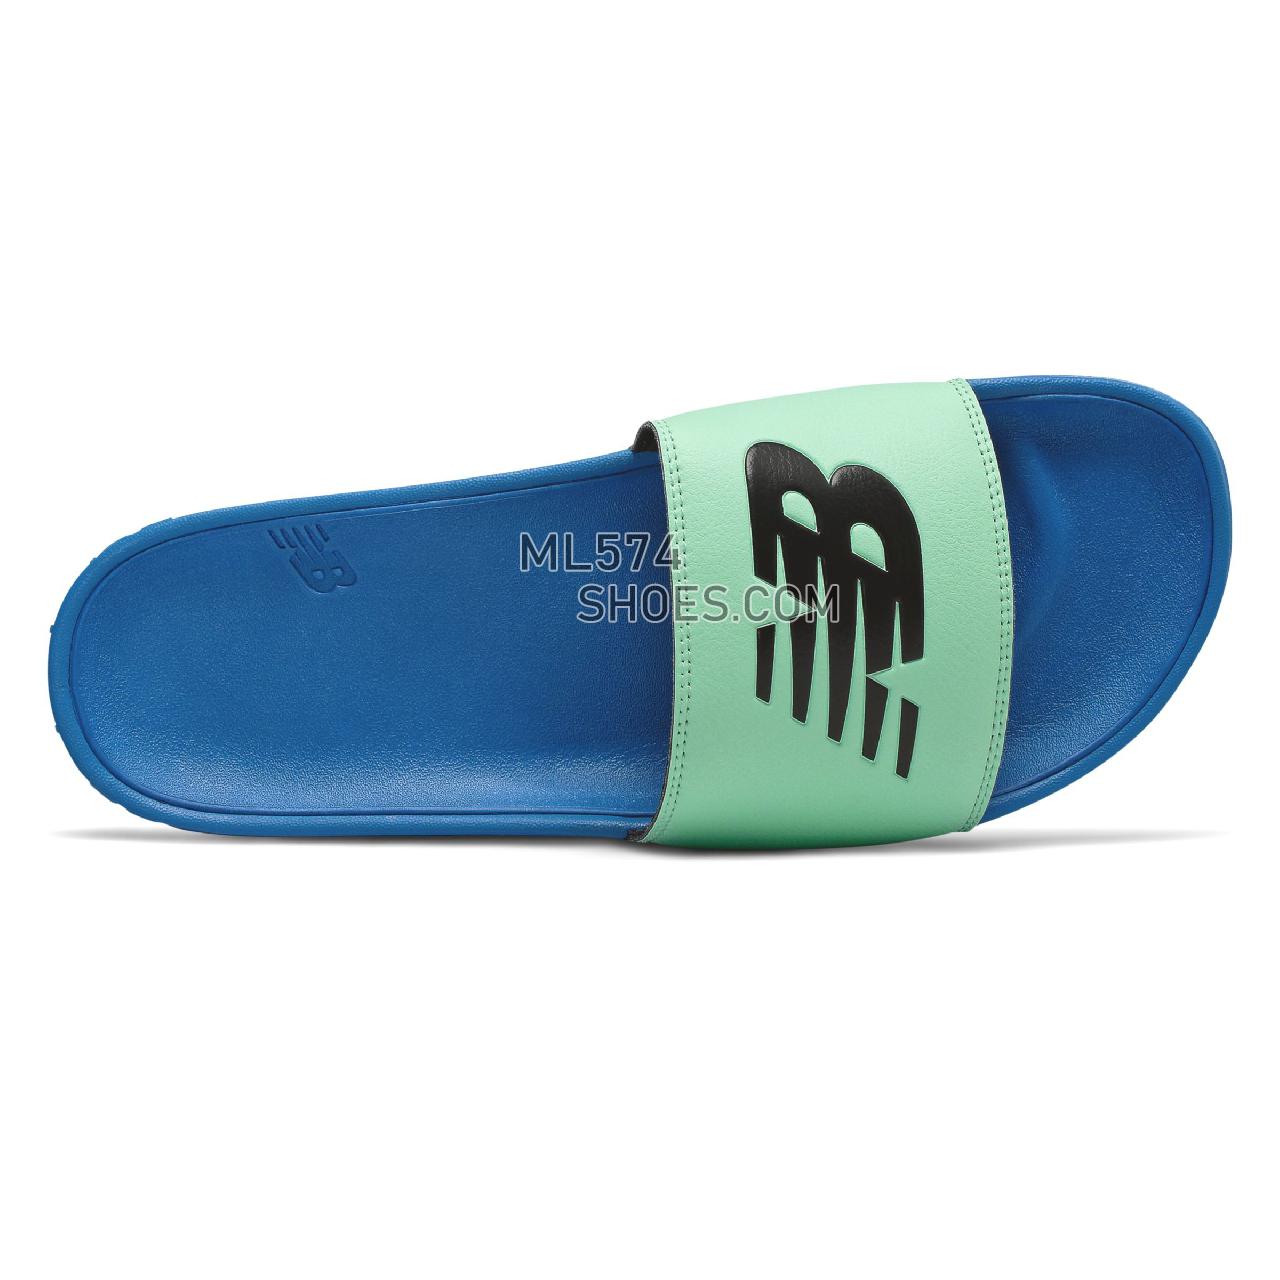 New Balance 200 - Men's Flip Flops - Neo Mint with Black and Vision Blue - SMF200MB